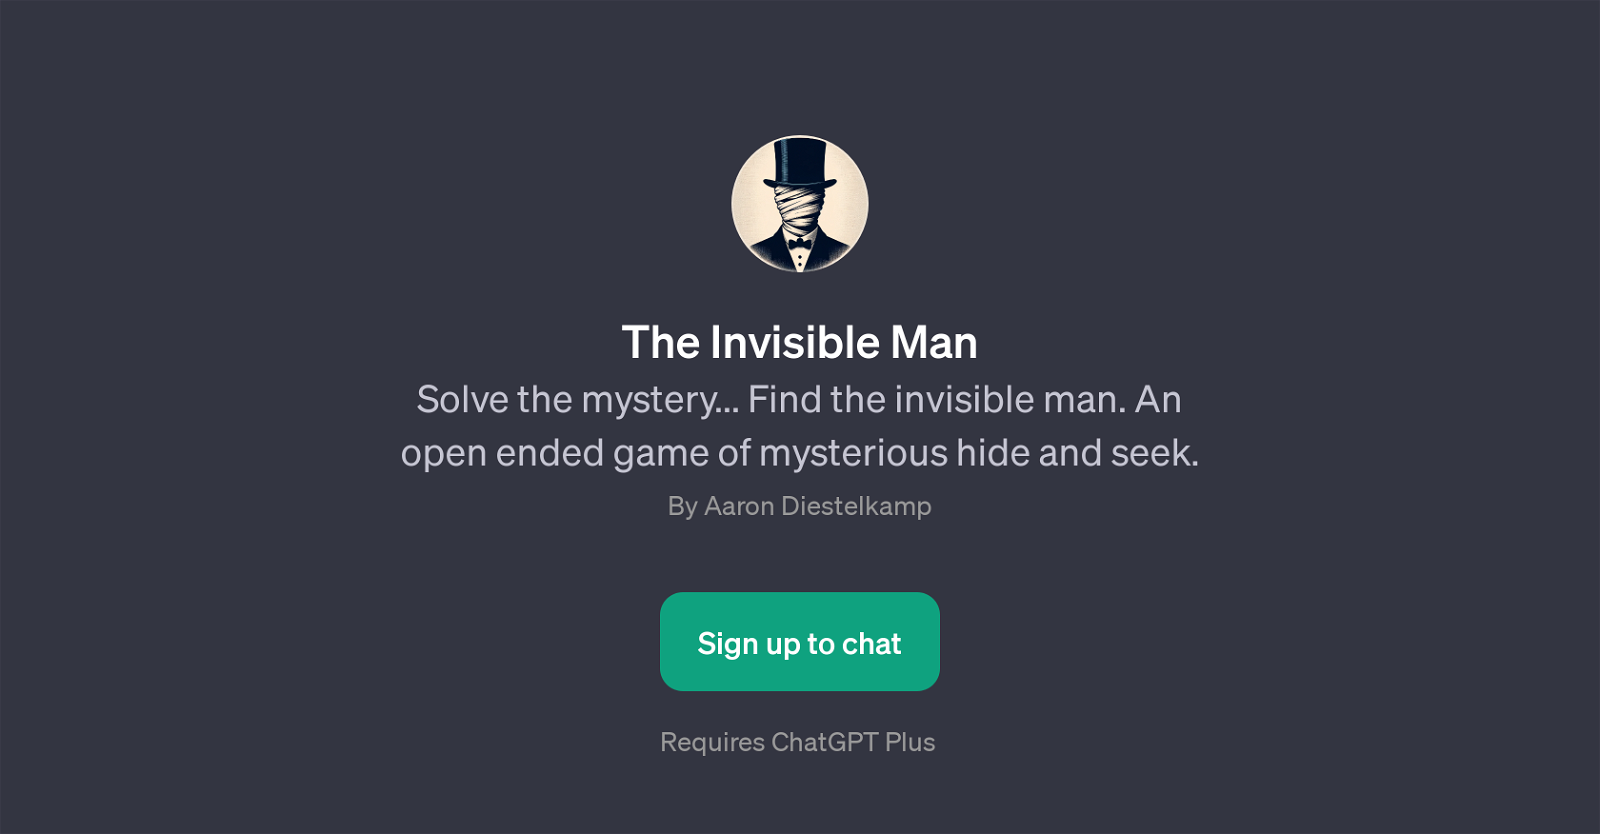 The Invisible Man website